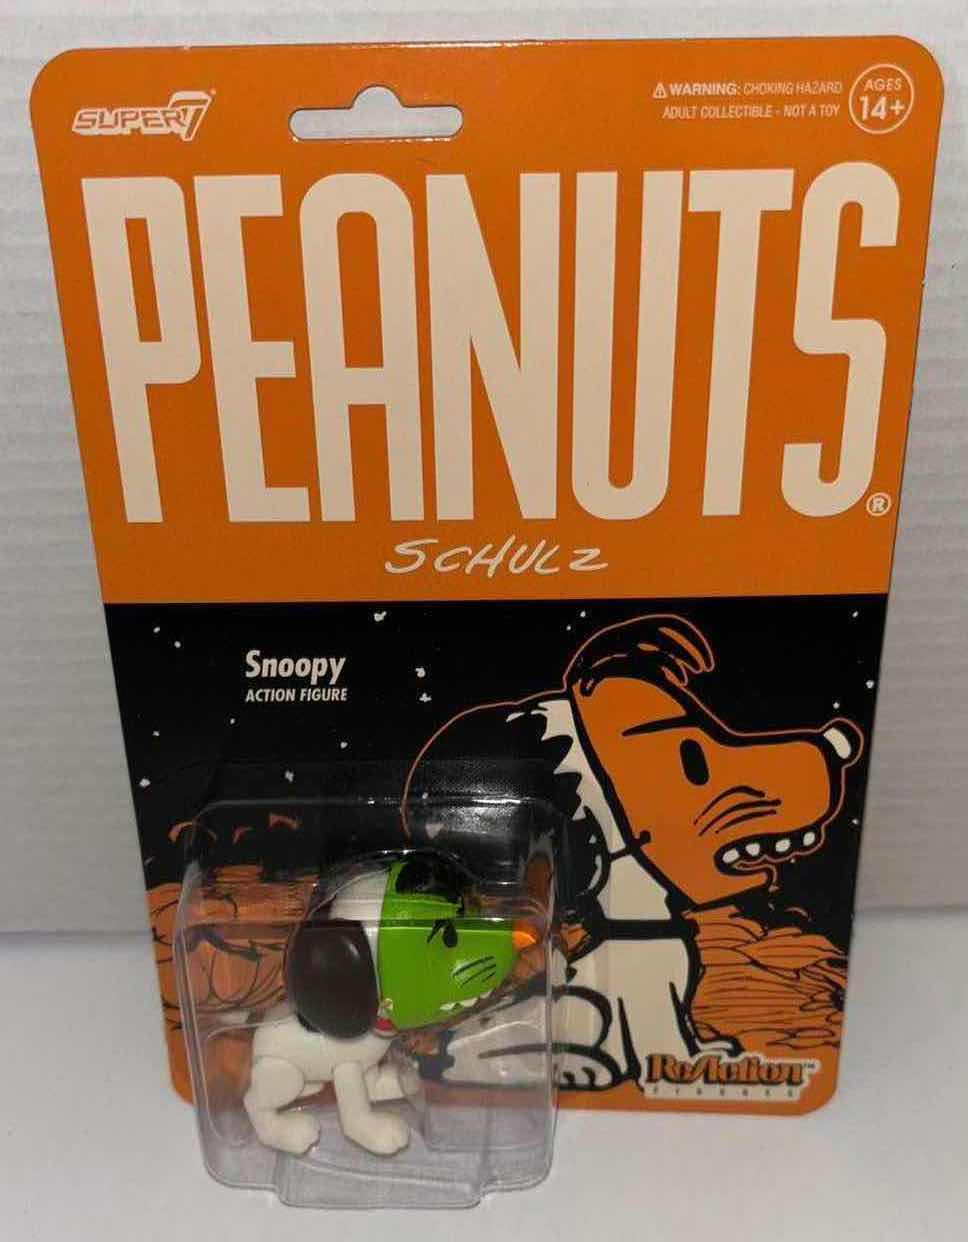 Photo 1 of BRAND NEW SUPER7 REACTION FIGURES PEANUTS “SNOOPY”, OCTOBER 26 1952